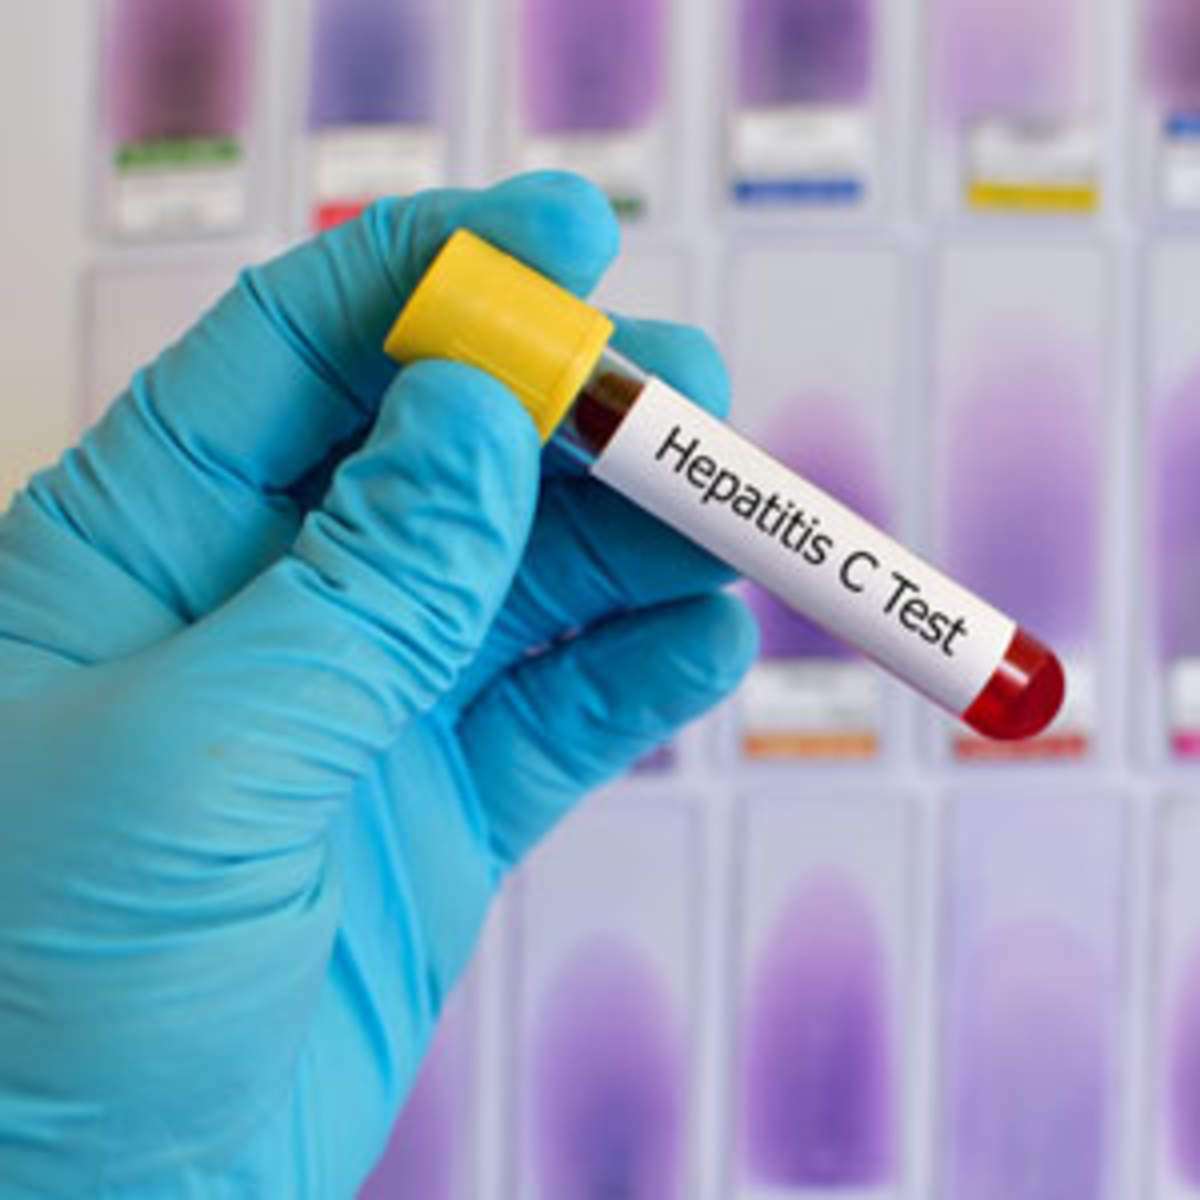 Hepatitis C Point of Care Testing: What Is Its Impact on Testing and ...